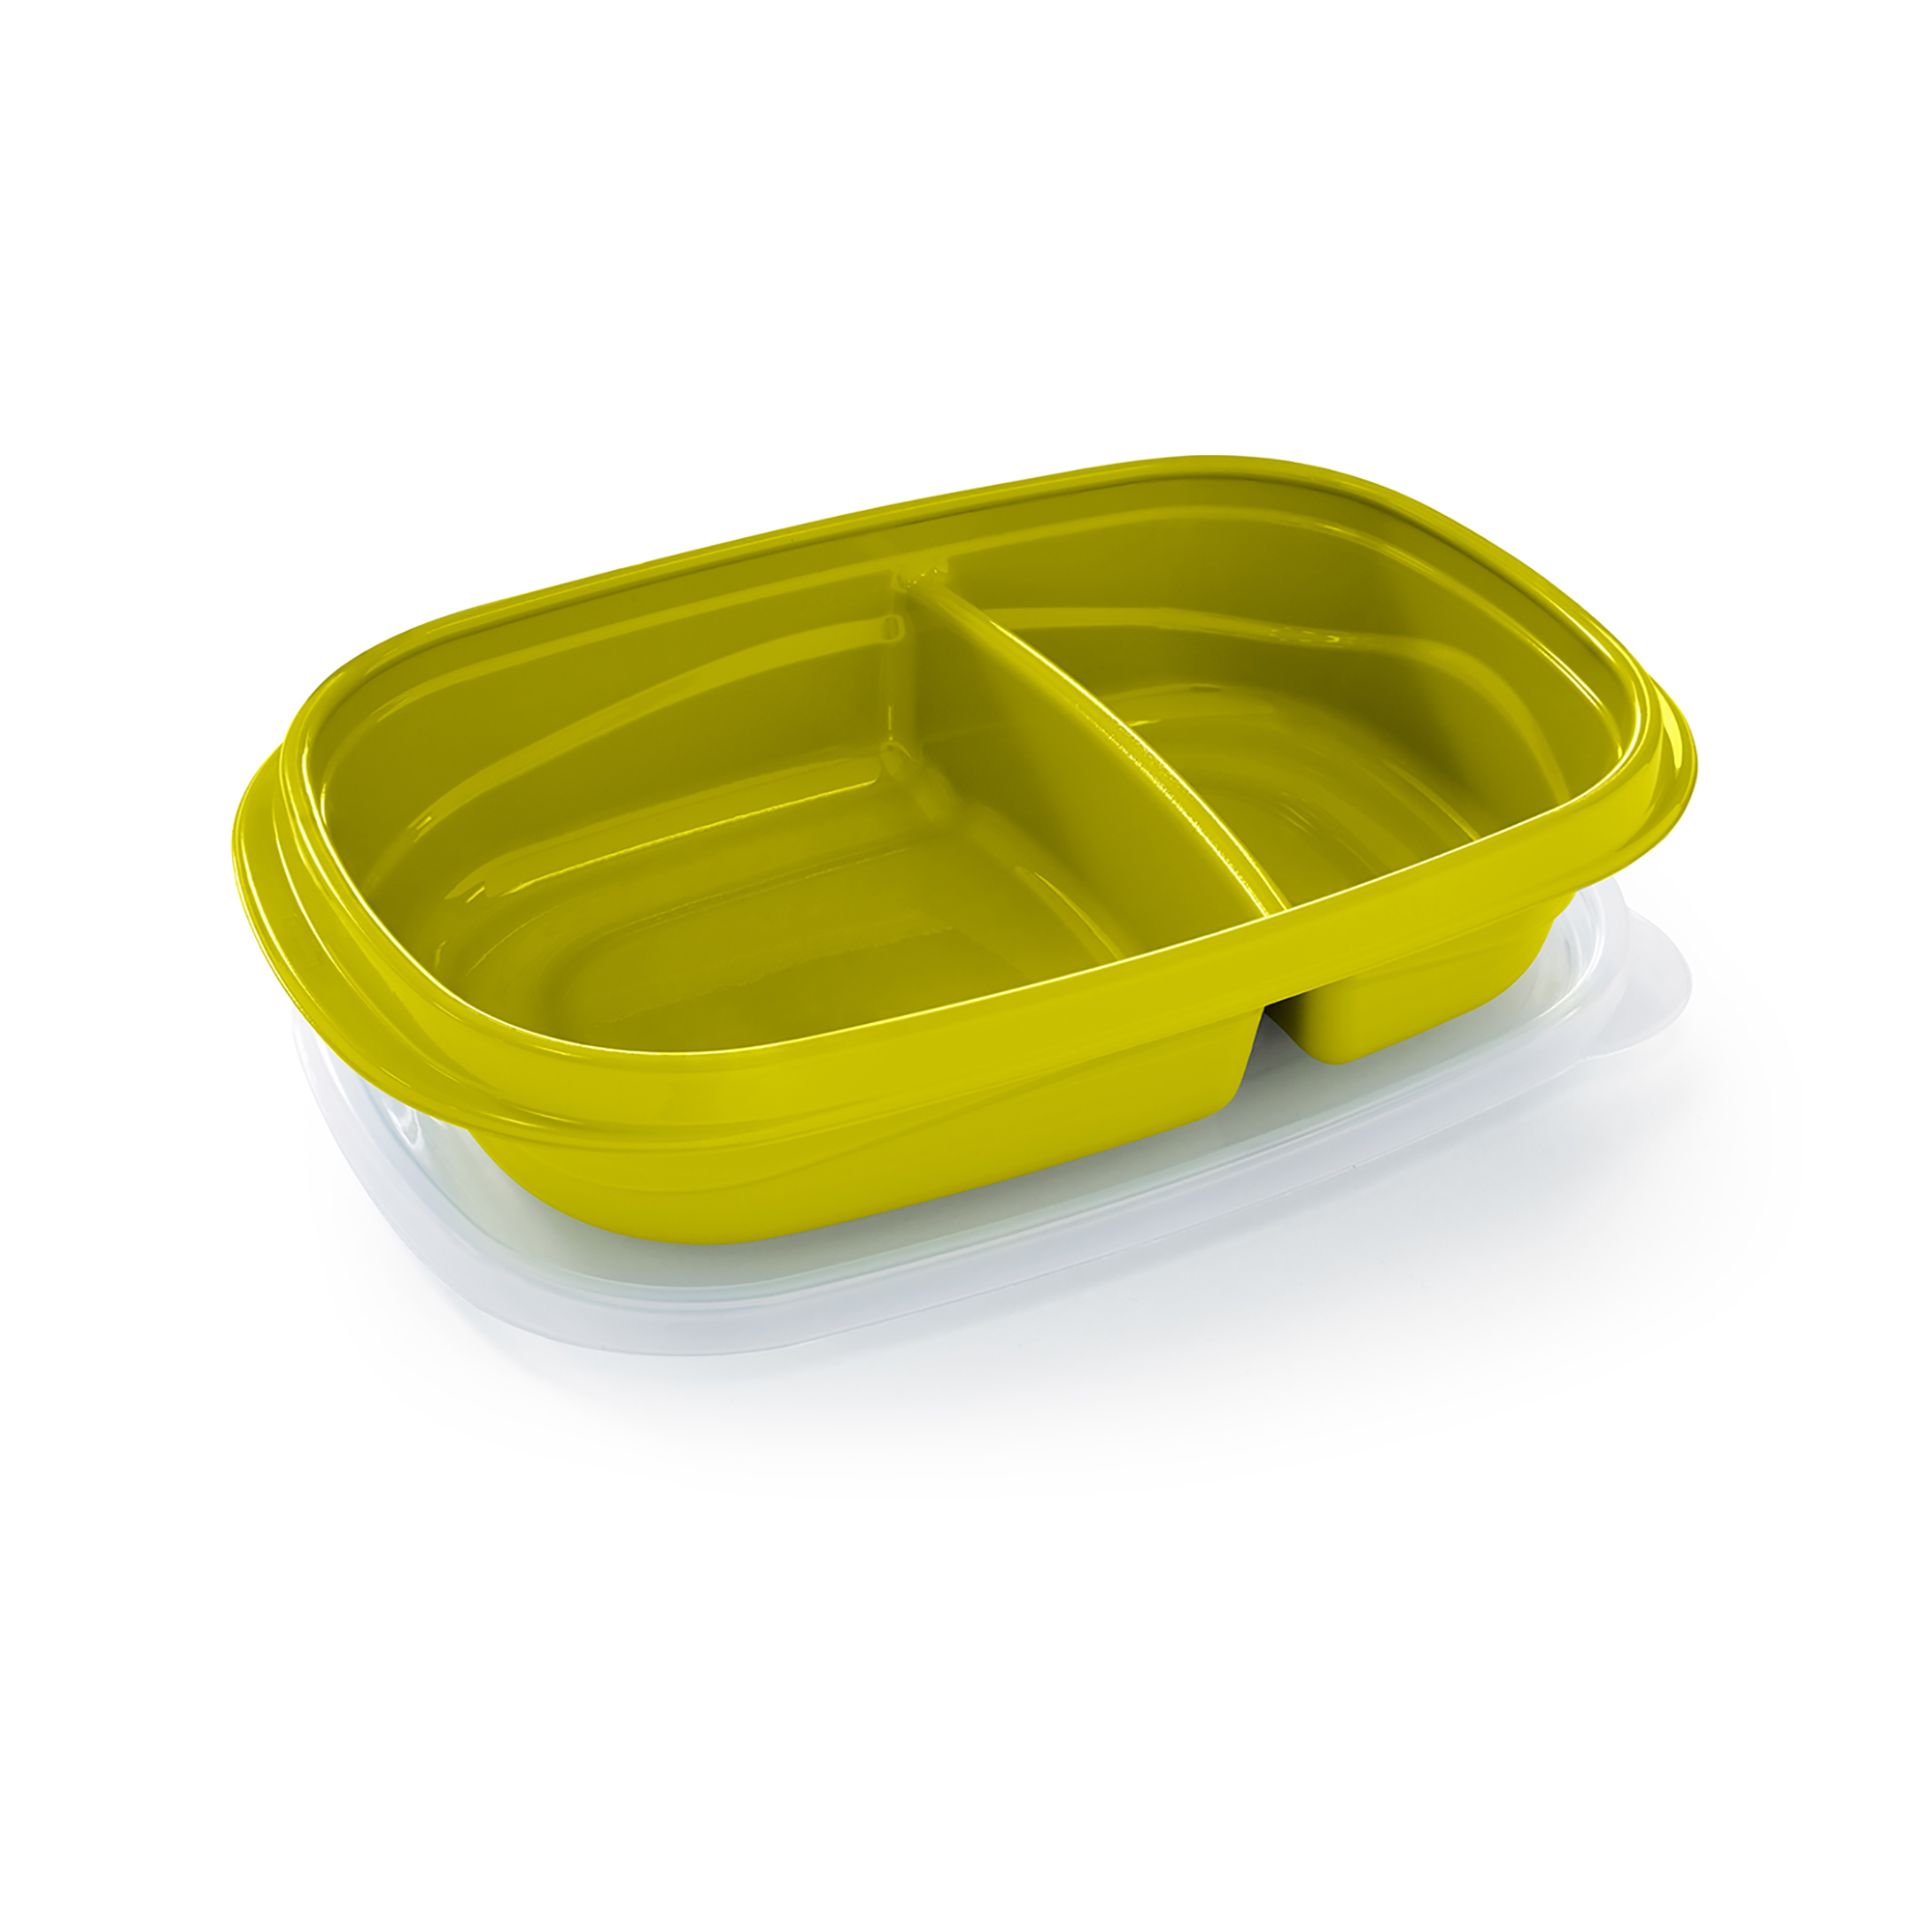 Rubbermaid TakeAlongs 3.7 Cup Divided Food Storage Containers, Set of 3, color may vary - image 4 of 4